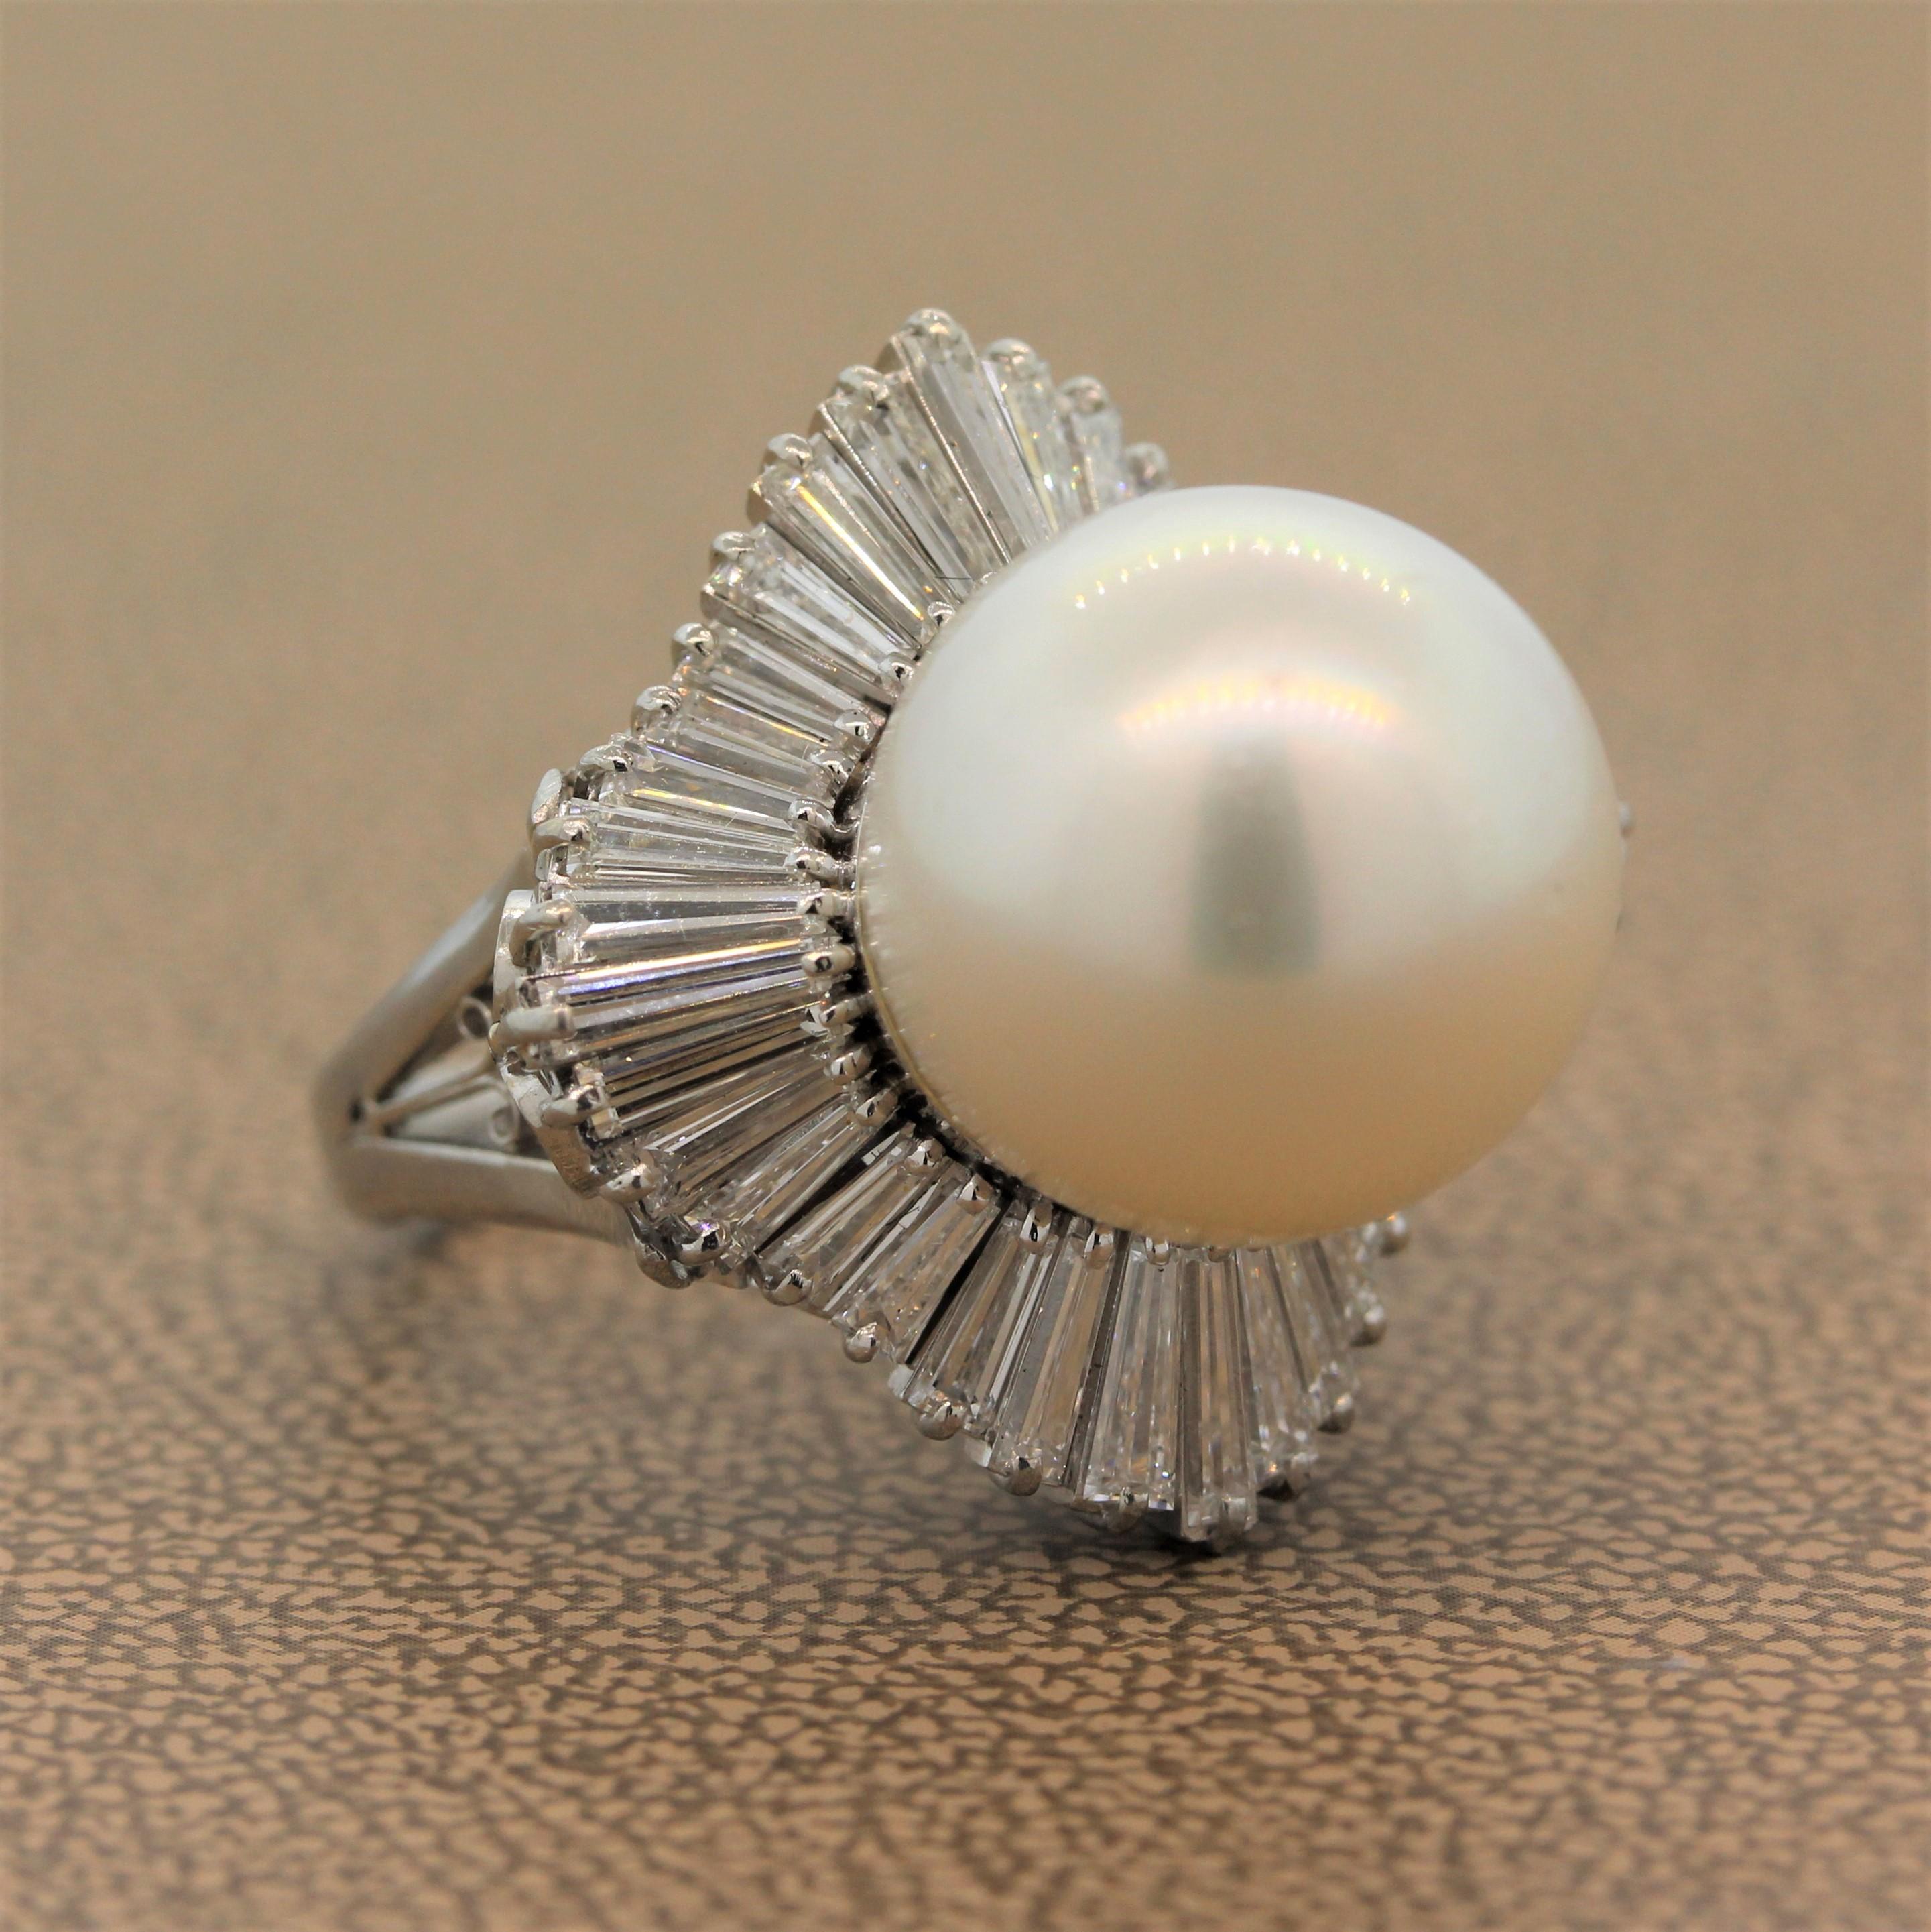 A 14.5mm South Sea pearl takes center stage in this superb estate ring. The platinum setting features fine filigree work encircling the ballerina style halo of this ring with 3.24 carats of VS quality baguette cut diamonds.

Ring Size 6 (Sizable)
